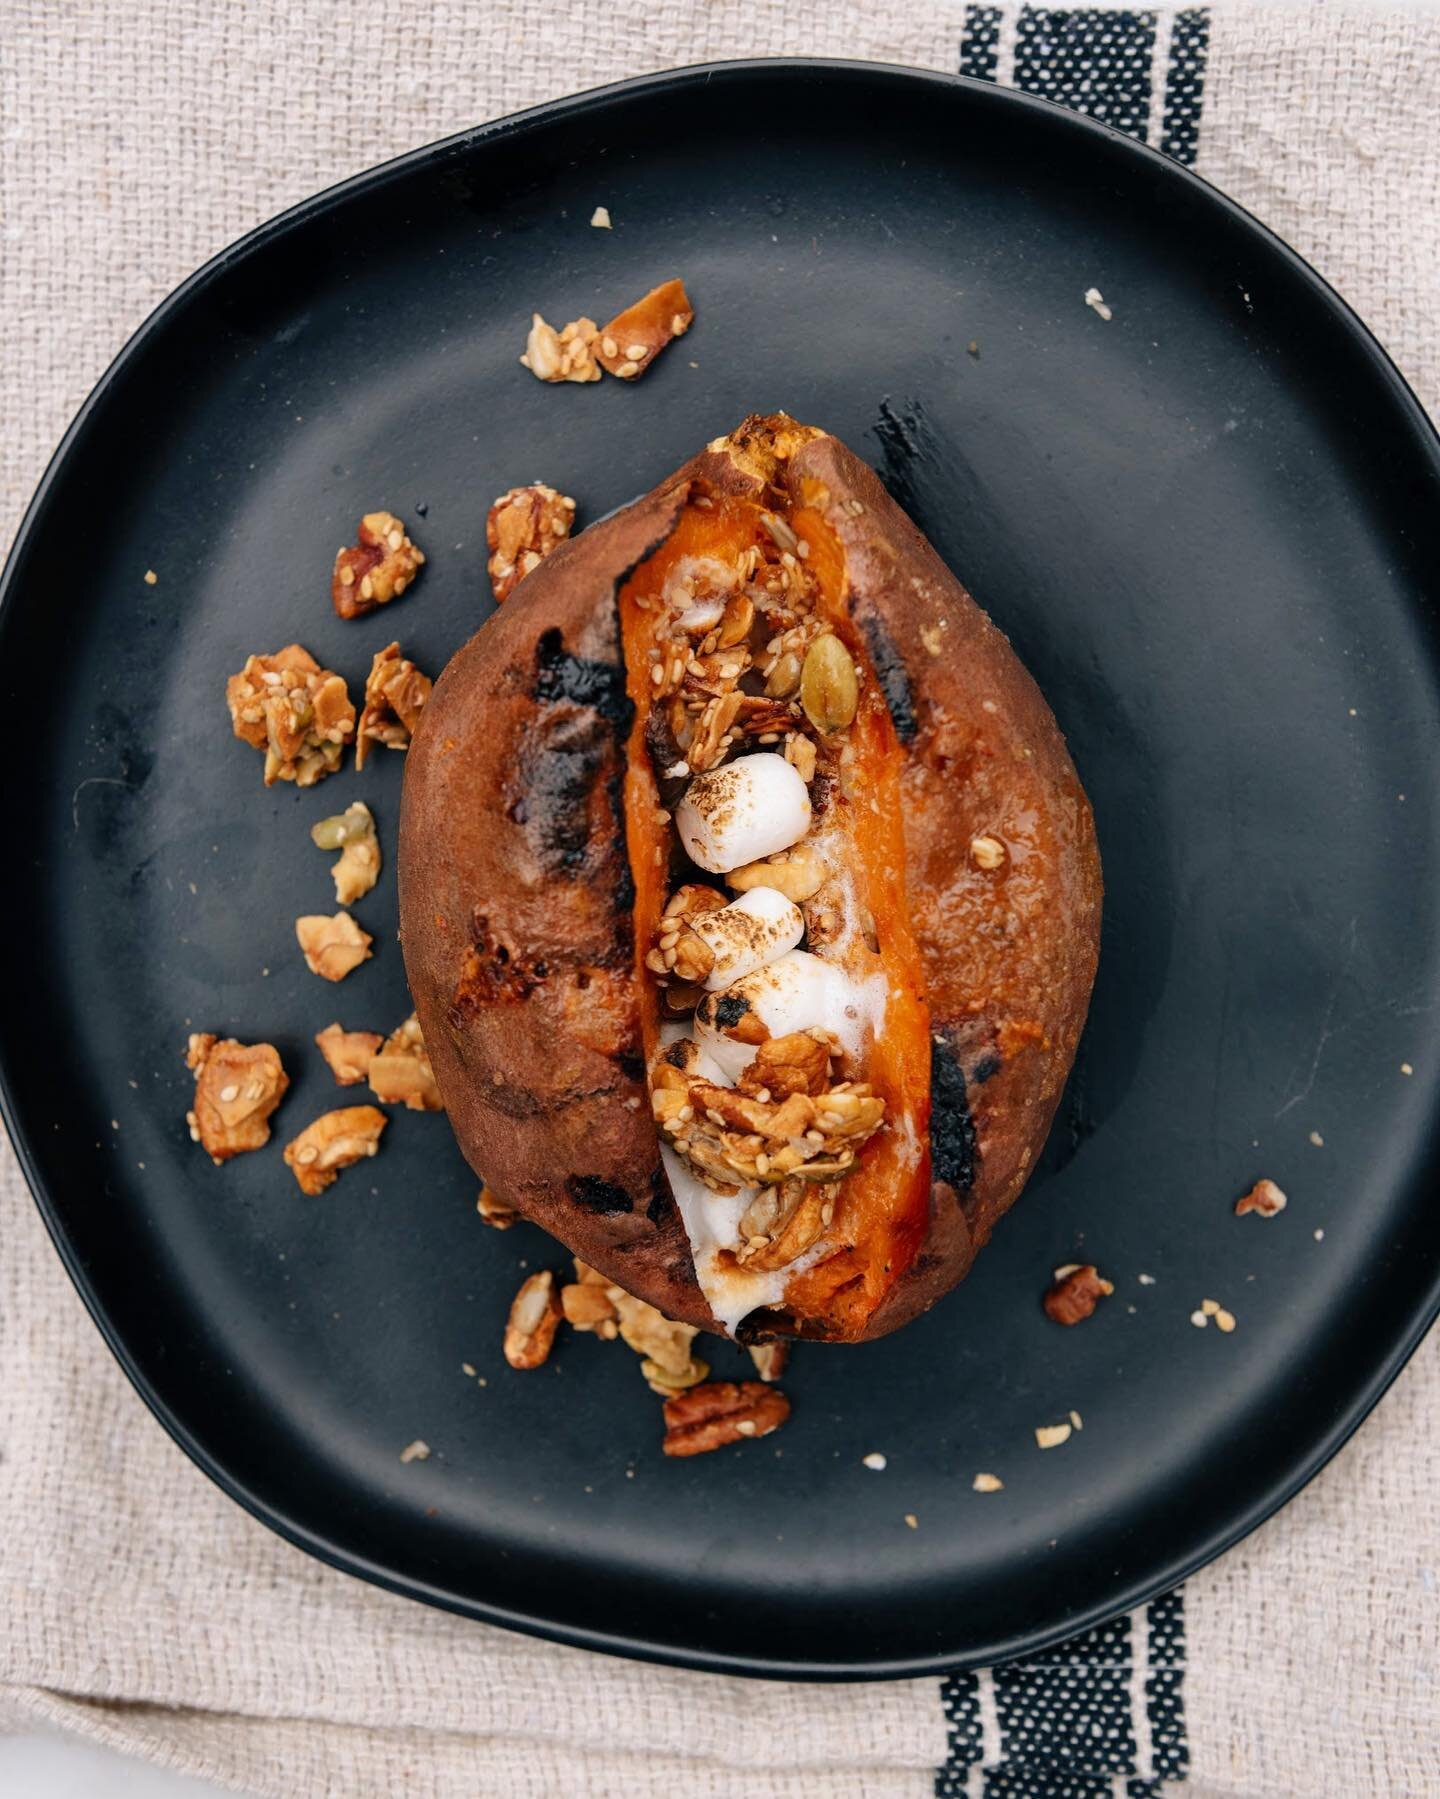 Who needs turkey when you have a stuffed sweet potato. Skip the sweet potato casserole this year and served individual sweet potatoes baked &amp; stuffed with marshmallows. Top it off with some crispy granola for some sweet crunch. @grandyoats #cocon